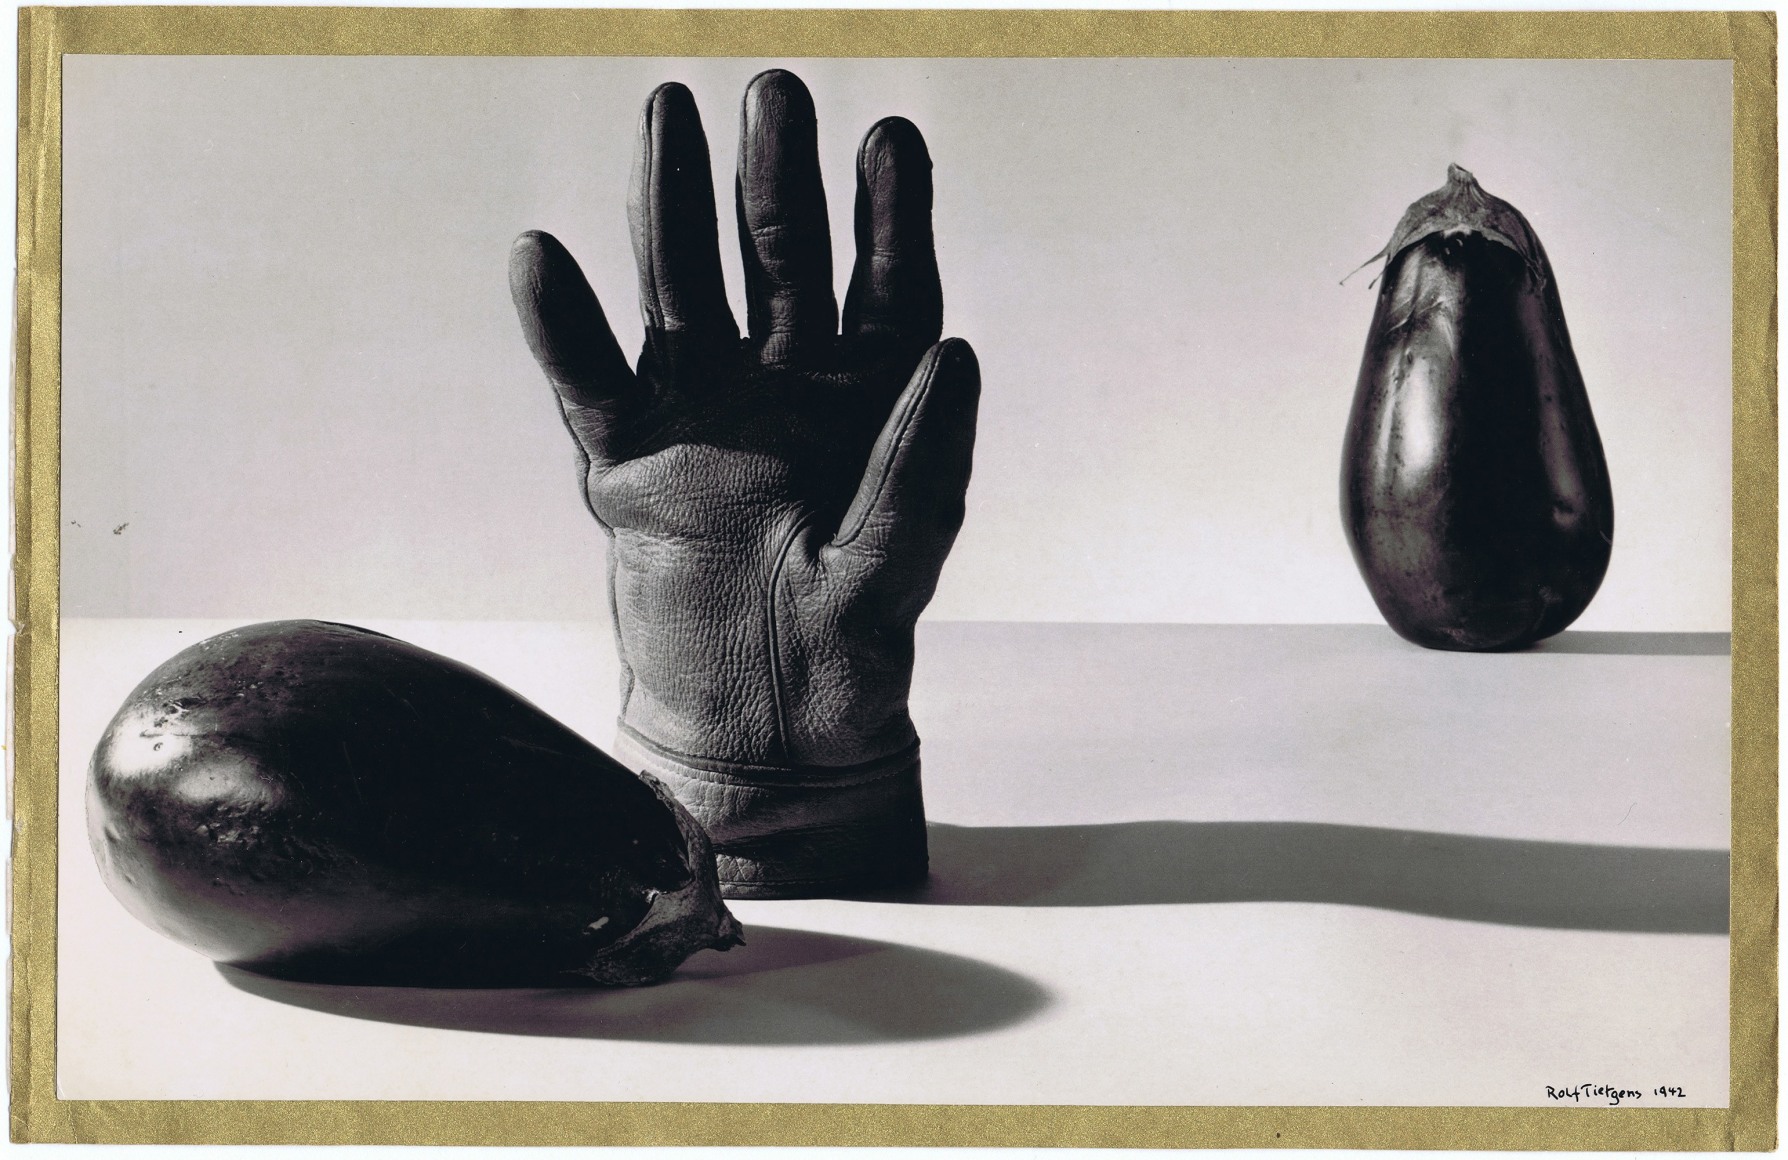 Rolf Tietgens, Artificial Landscapes, ​1942. An upright leather glove between two eggplants, one on its side and one upright.